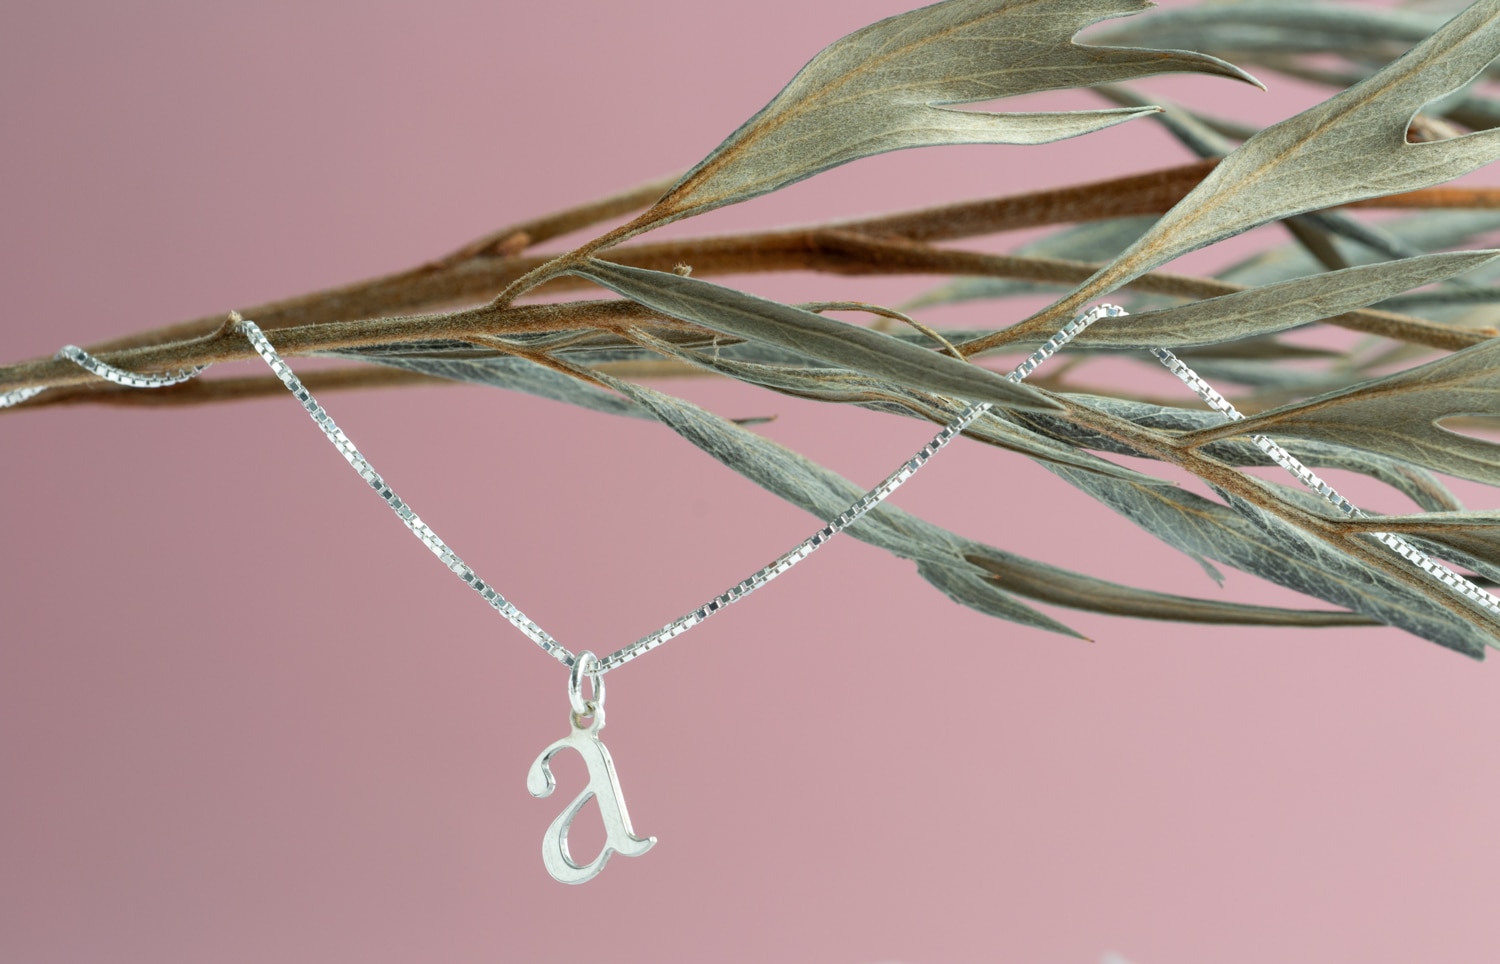 Sterling Silver Classic Letter Pendant